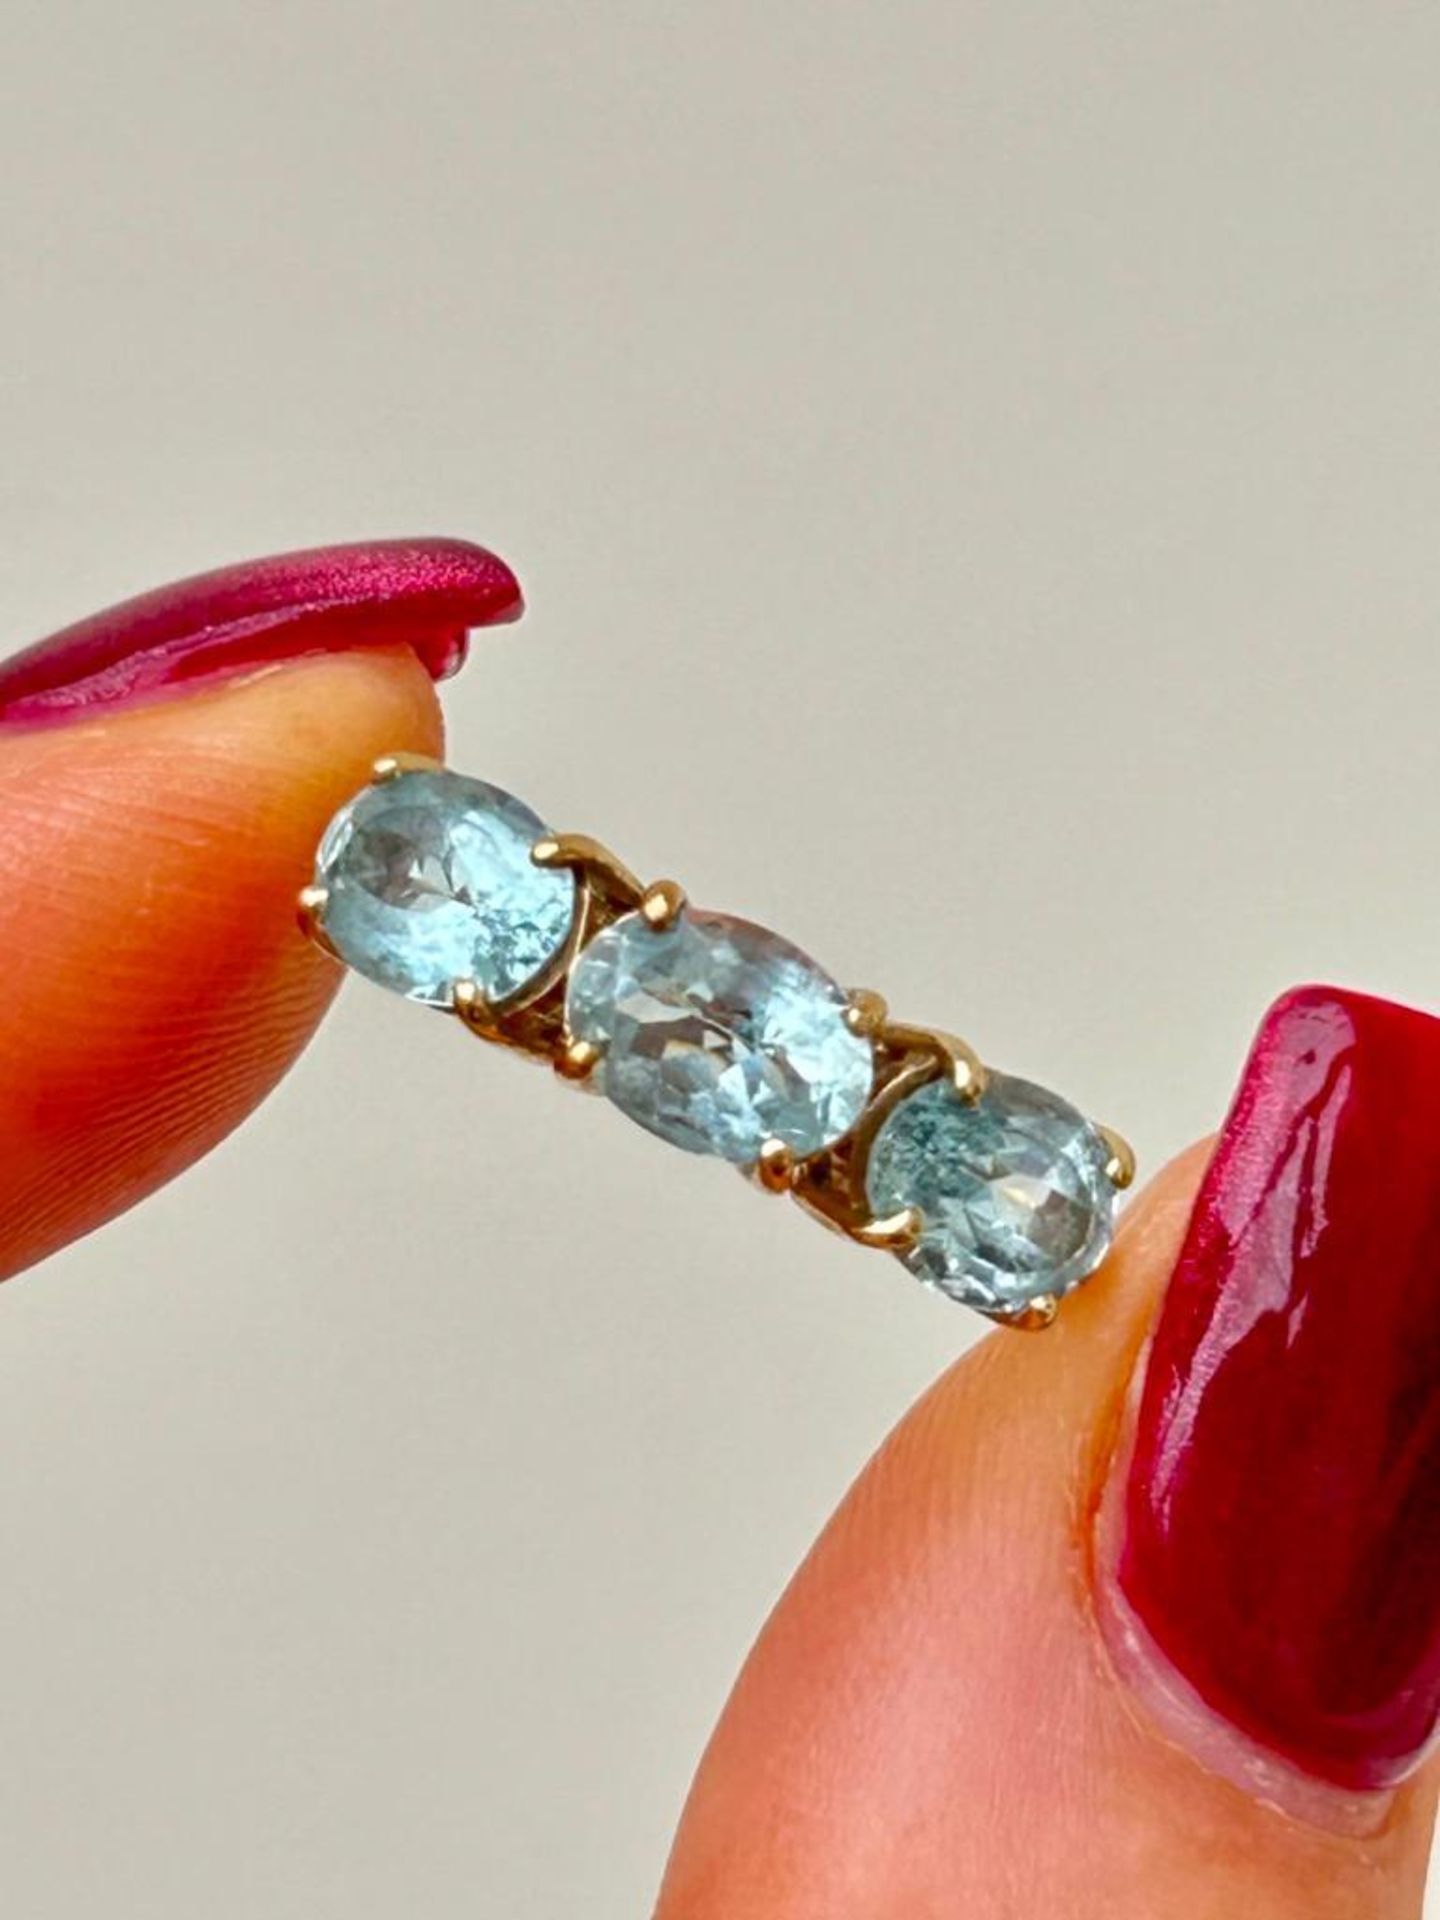 Sweet Aquamarine 3 Stone Ring with Diamond Shoulders in Gold - Image 7 of 7